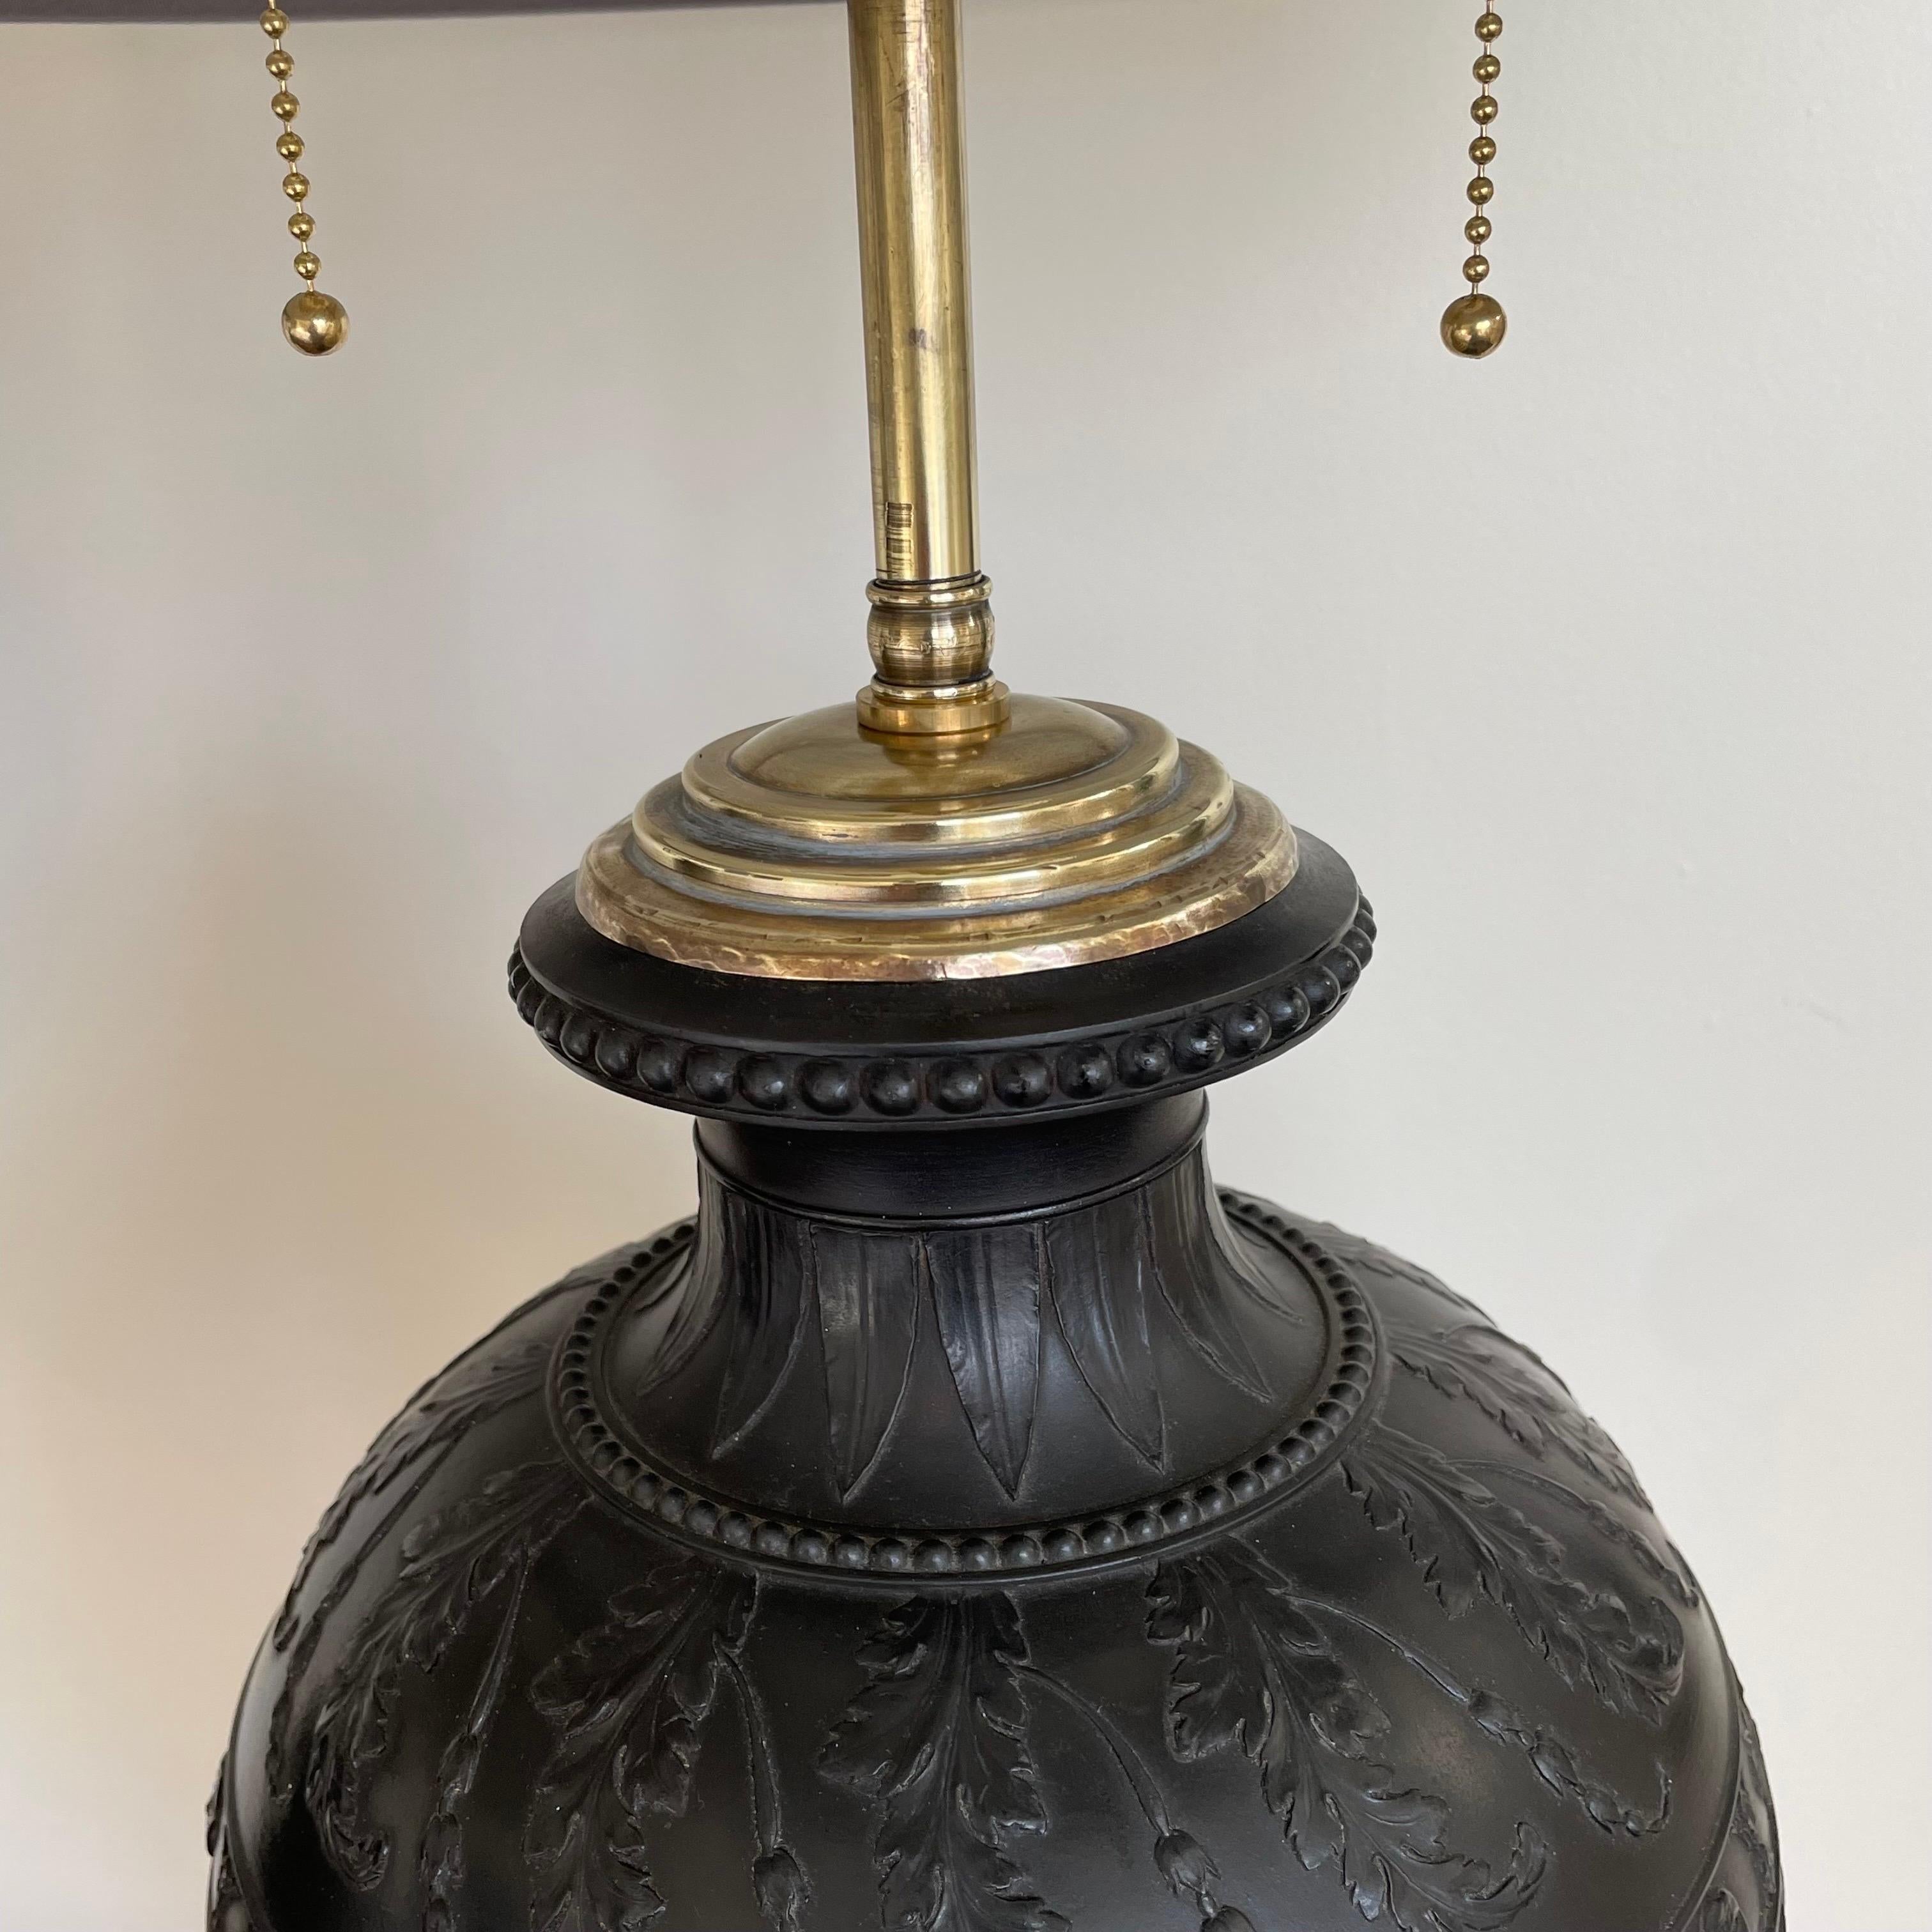 Monumental Pair of Black Basalt Table Lamps by Wedgwood, Late 19th Century In Good Condition For Sale In Bedford Hills, NY